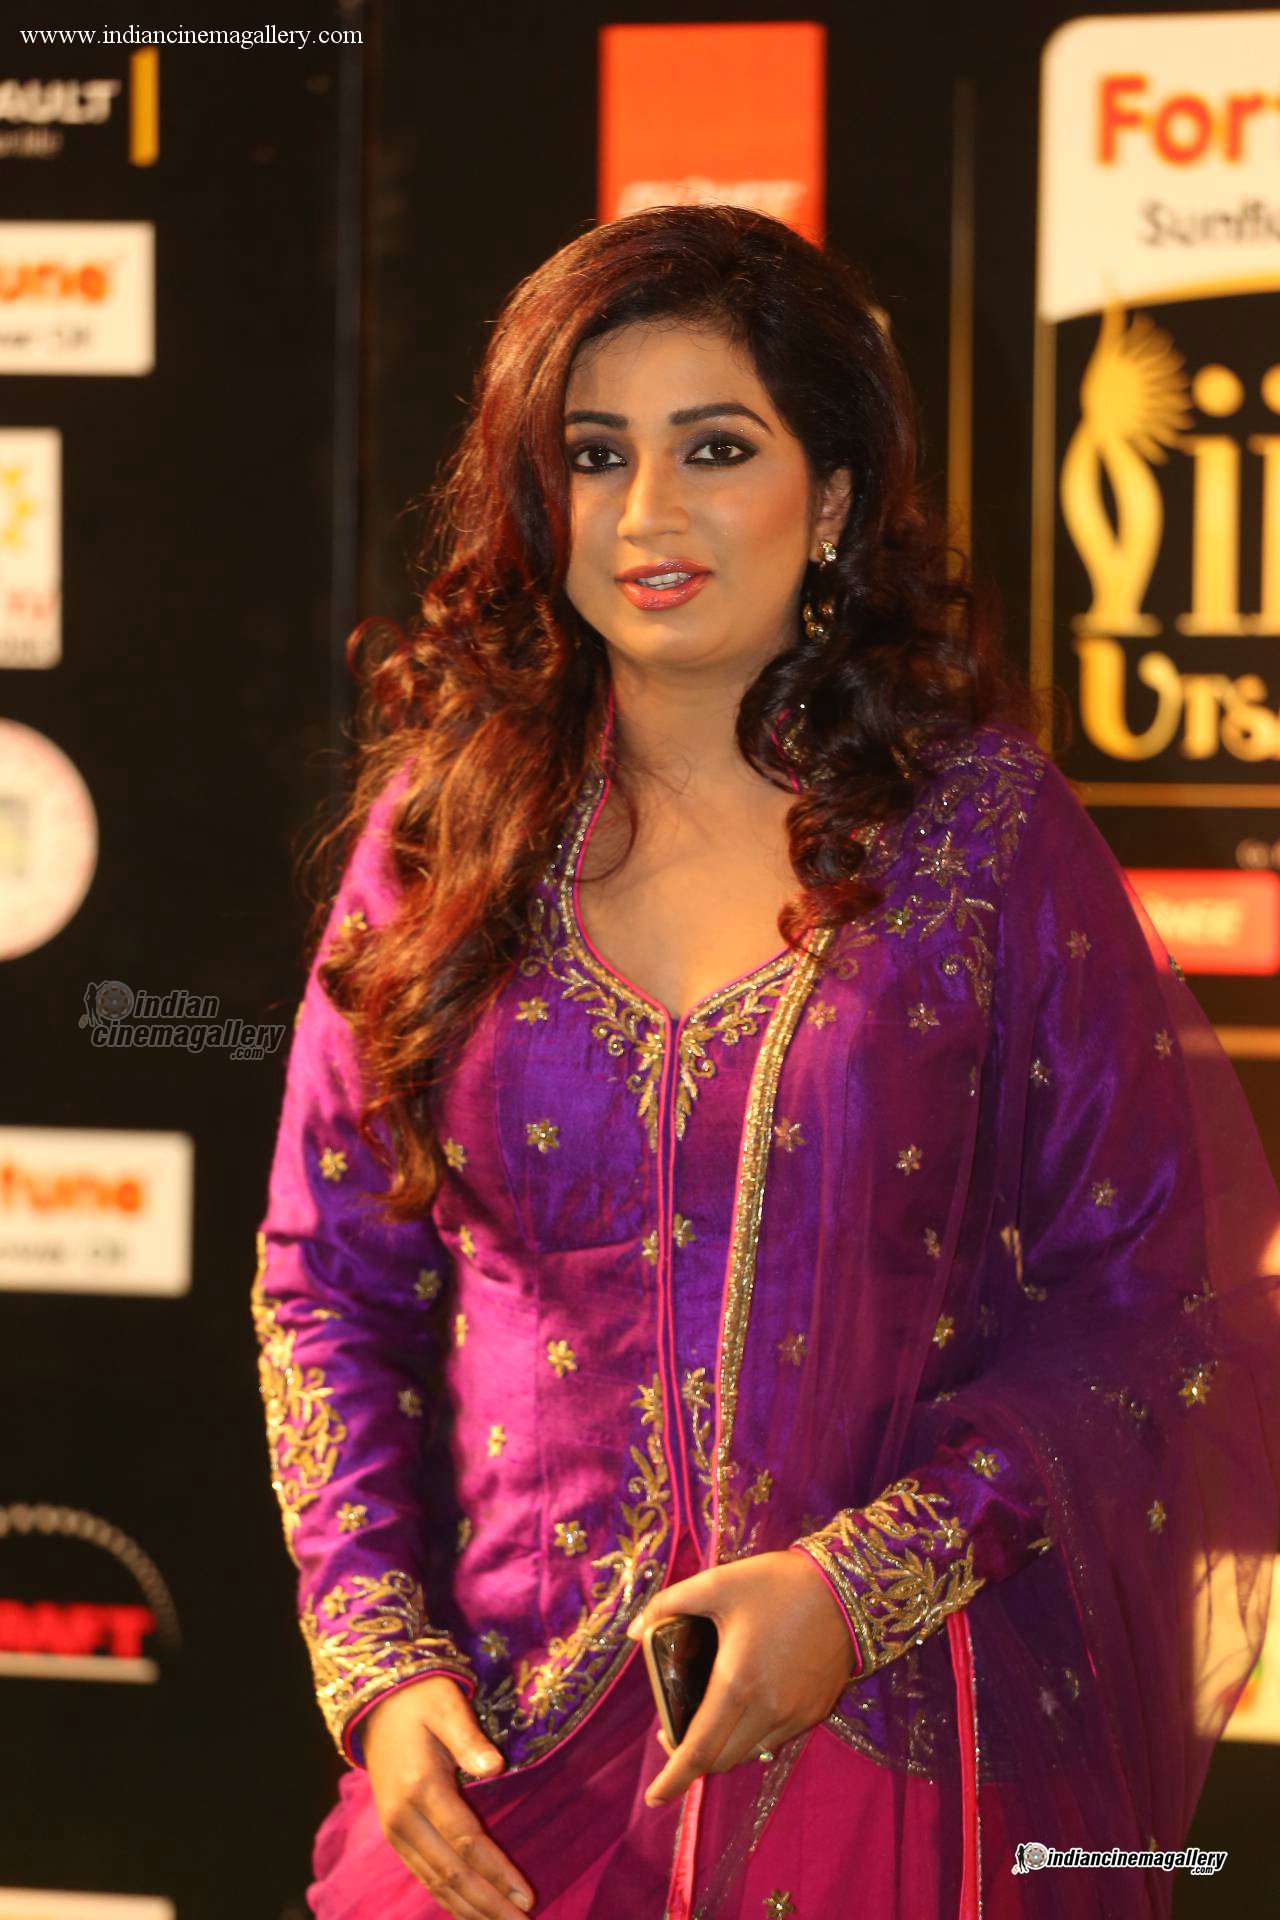 Wishing A Very Happy Birthday To Queen Of Melodious Voice, Shreya Ghoshal.       